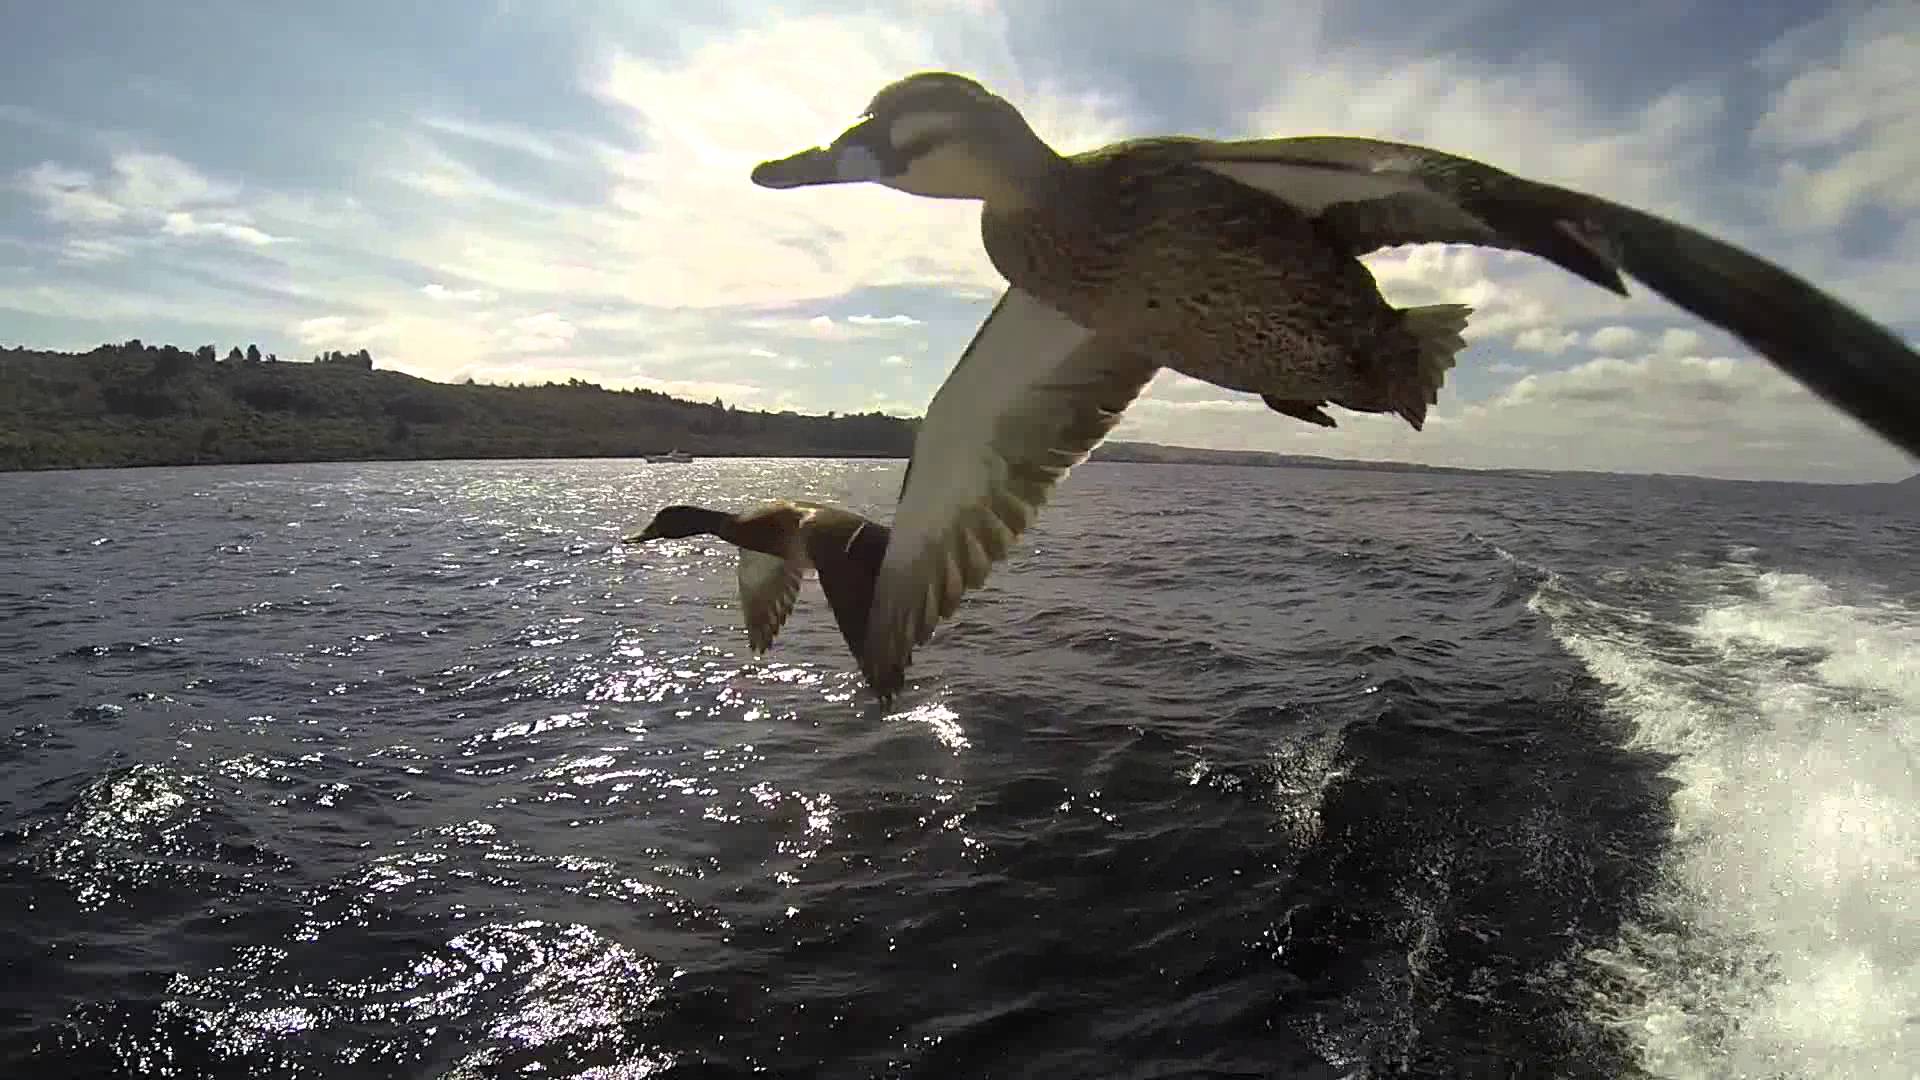 Flying Ducks - so close, you can almost touch, just incredible - YouTube